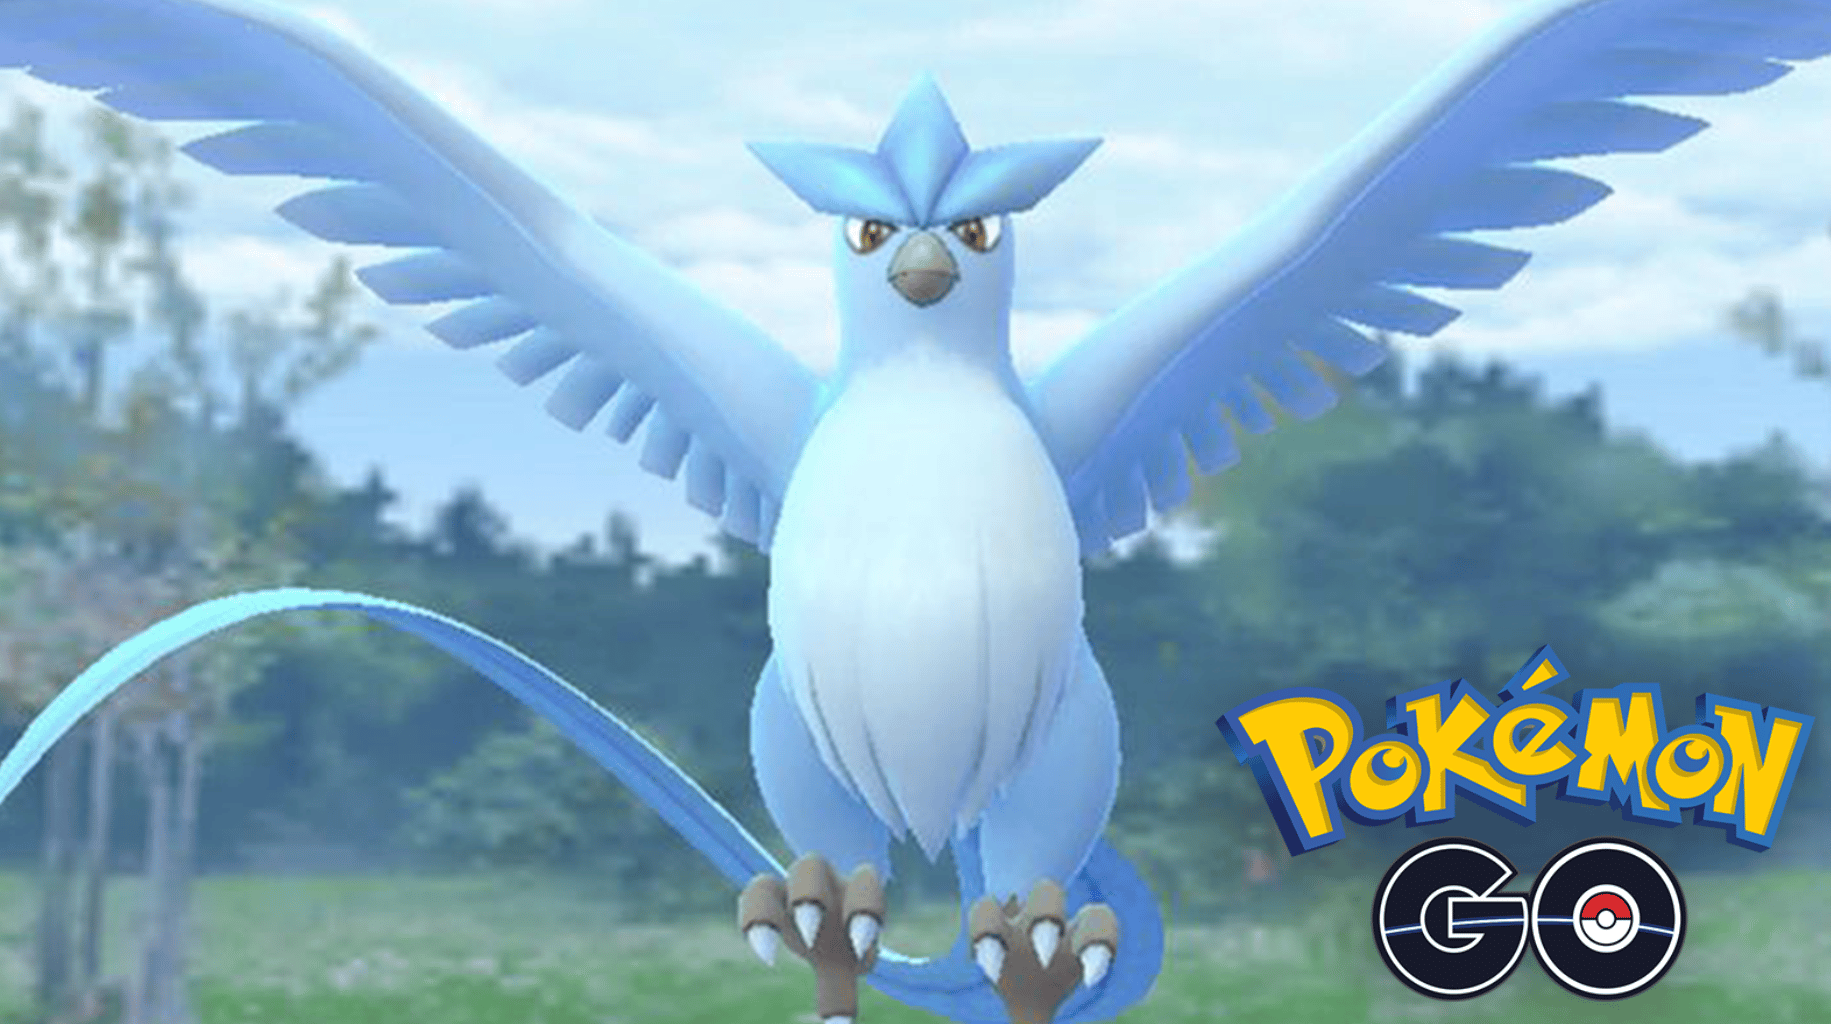 Pokemon Go Articuno Raid Guide: Best Counters, Weaknesses and